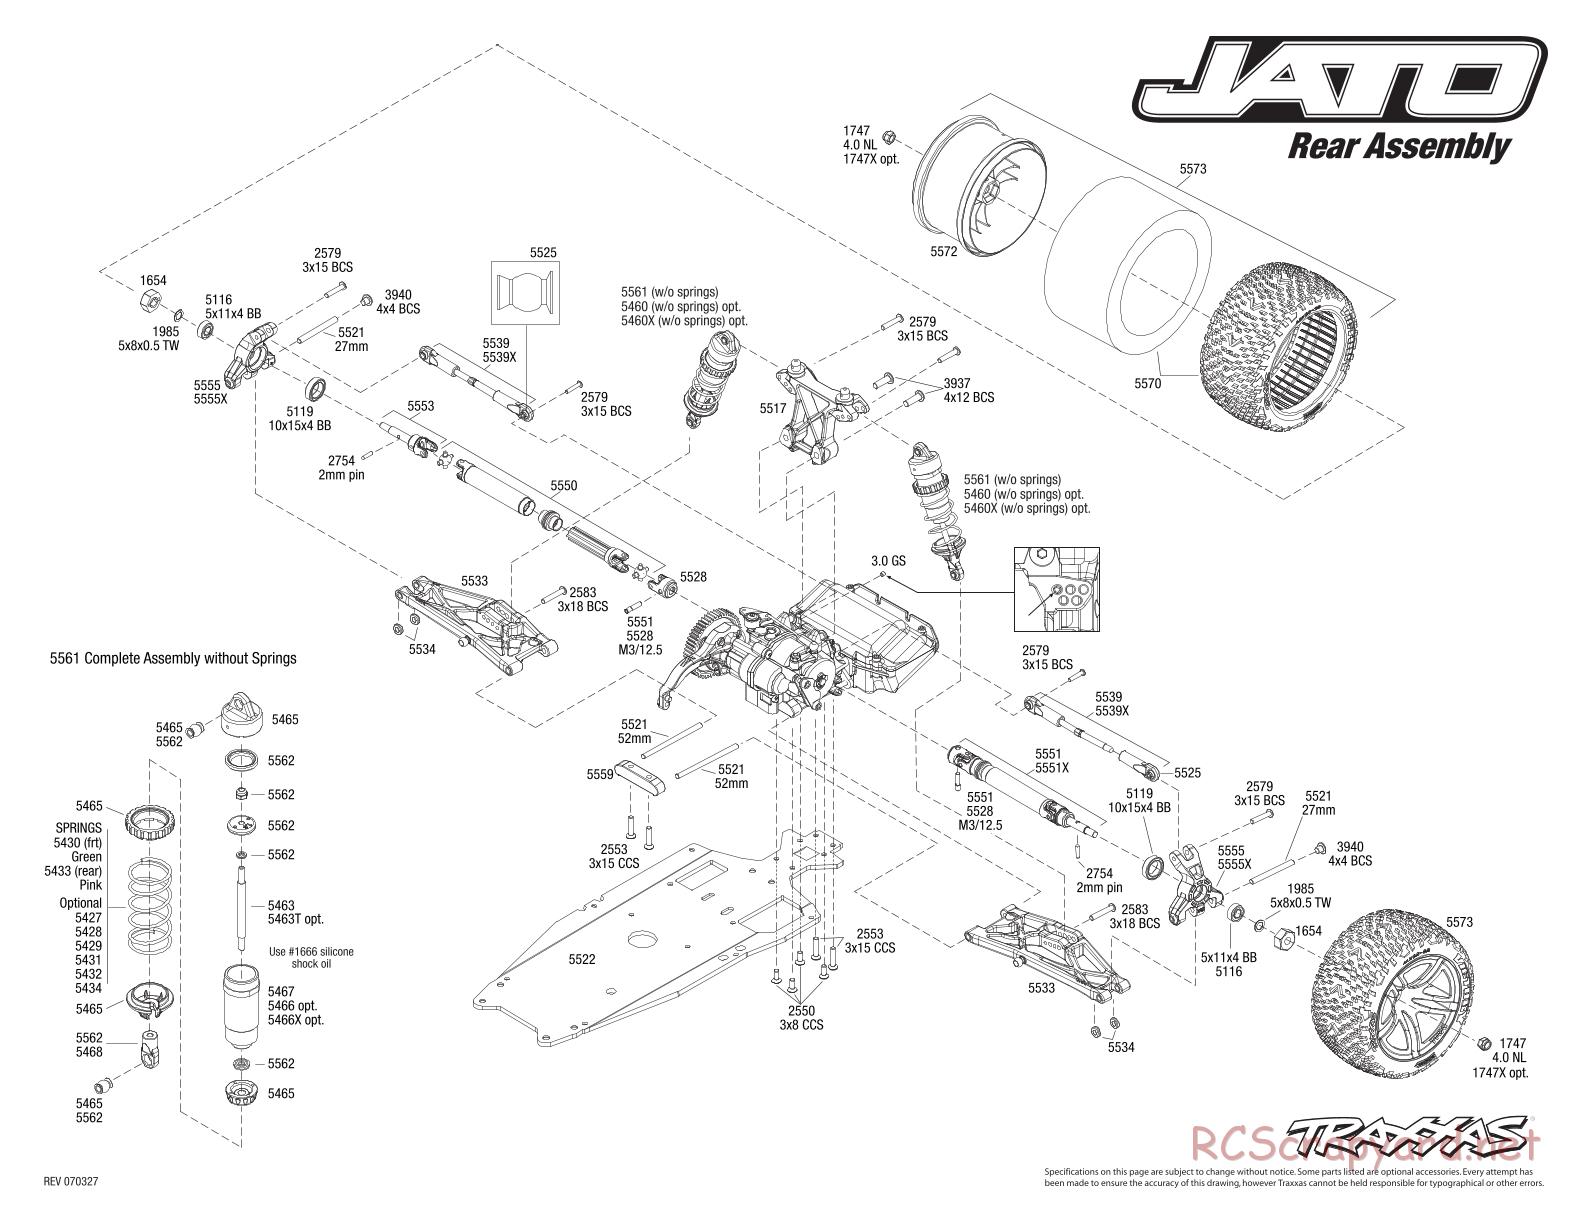 Traxxas - Jato 2.5 (2005) - Exploded Views - Page 3